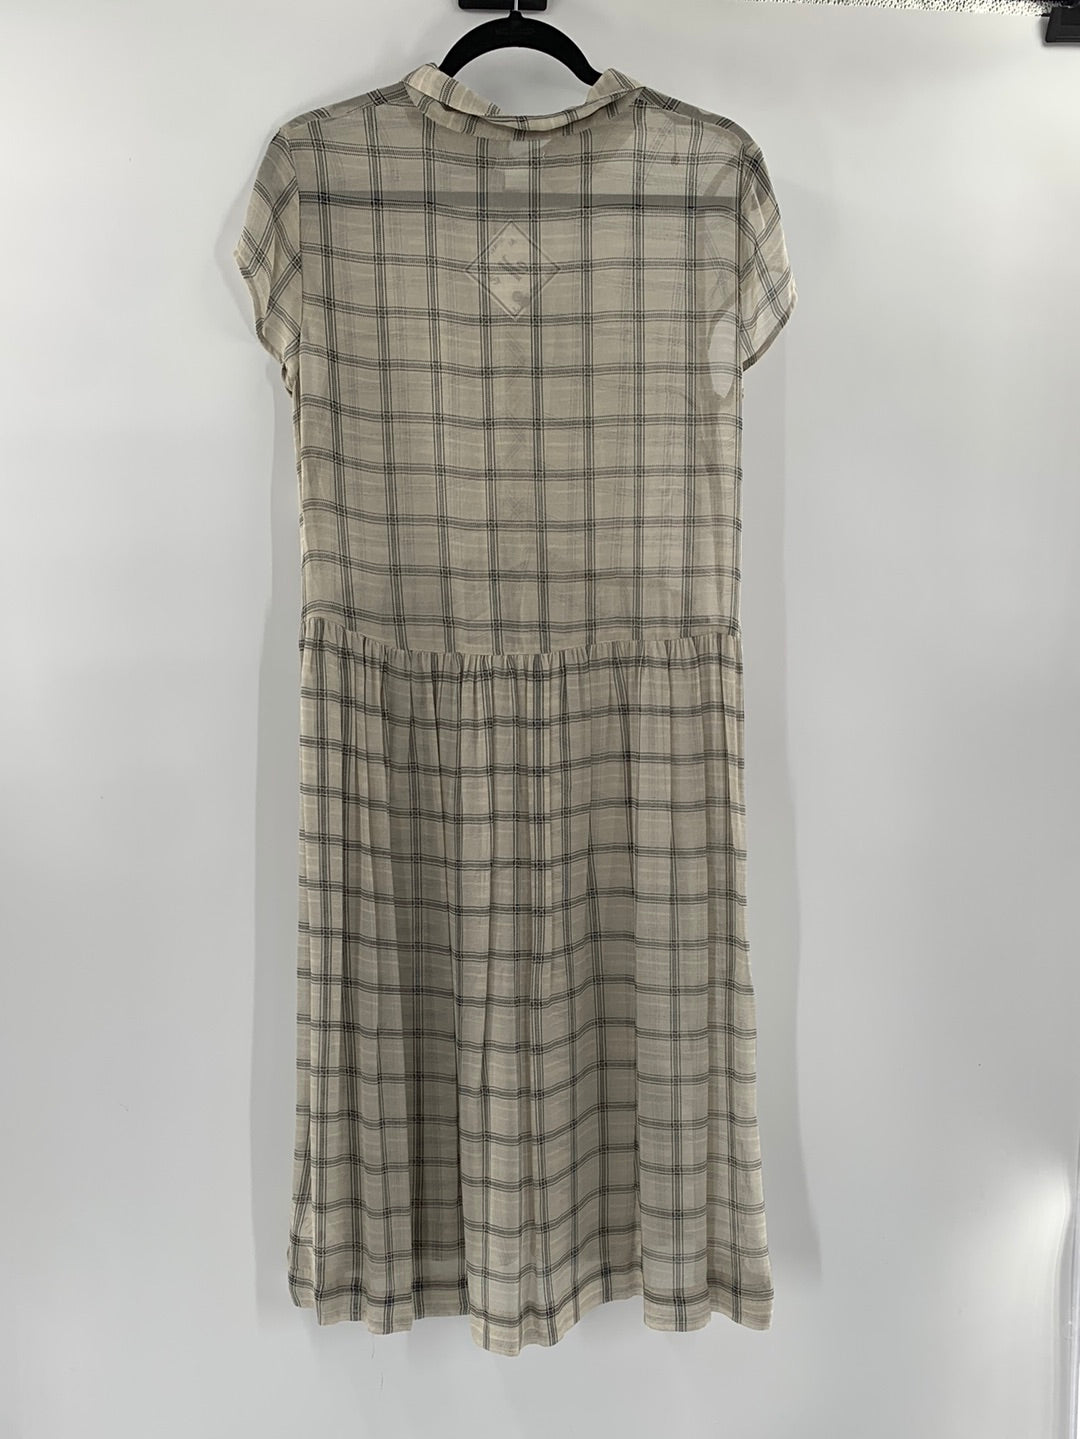 Cooperative - Front Button Up Flannel Patterned Pleated Midi Dress (Size Medium)